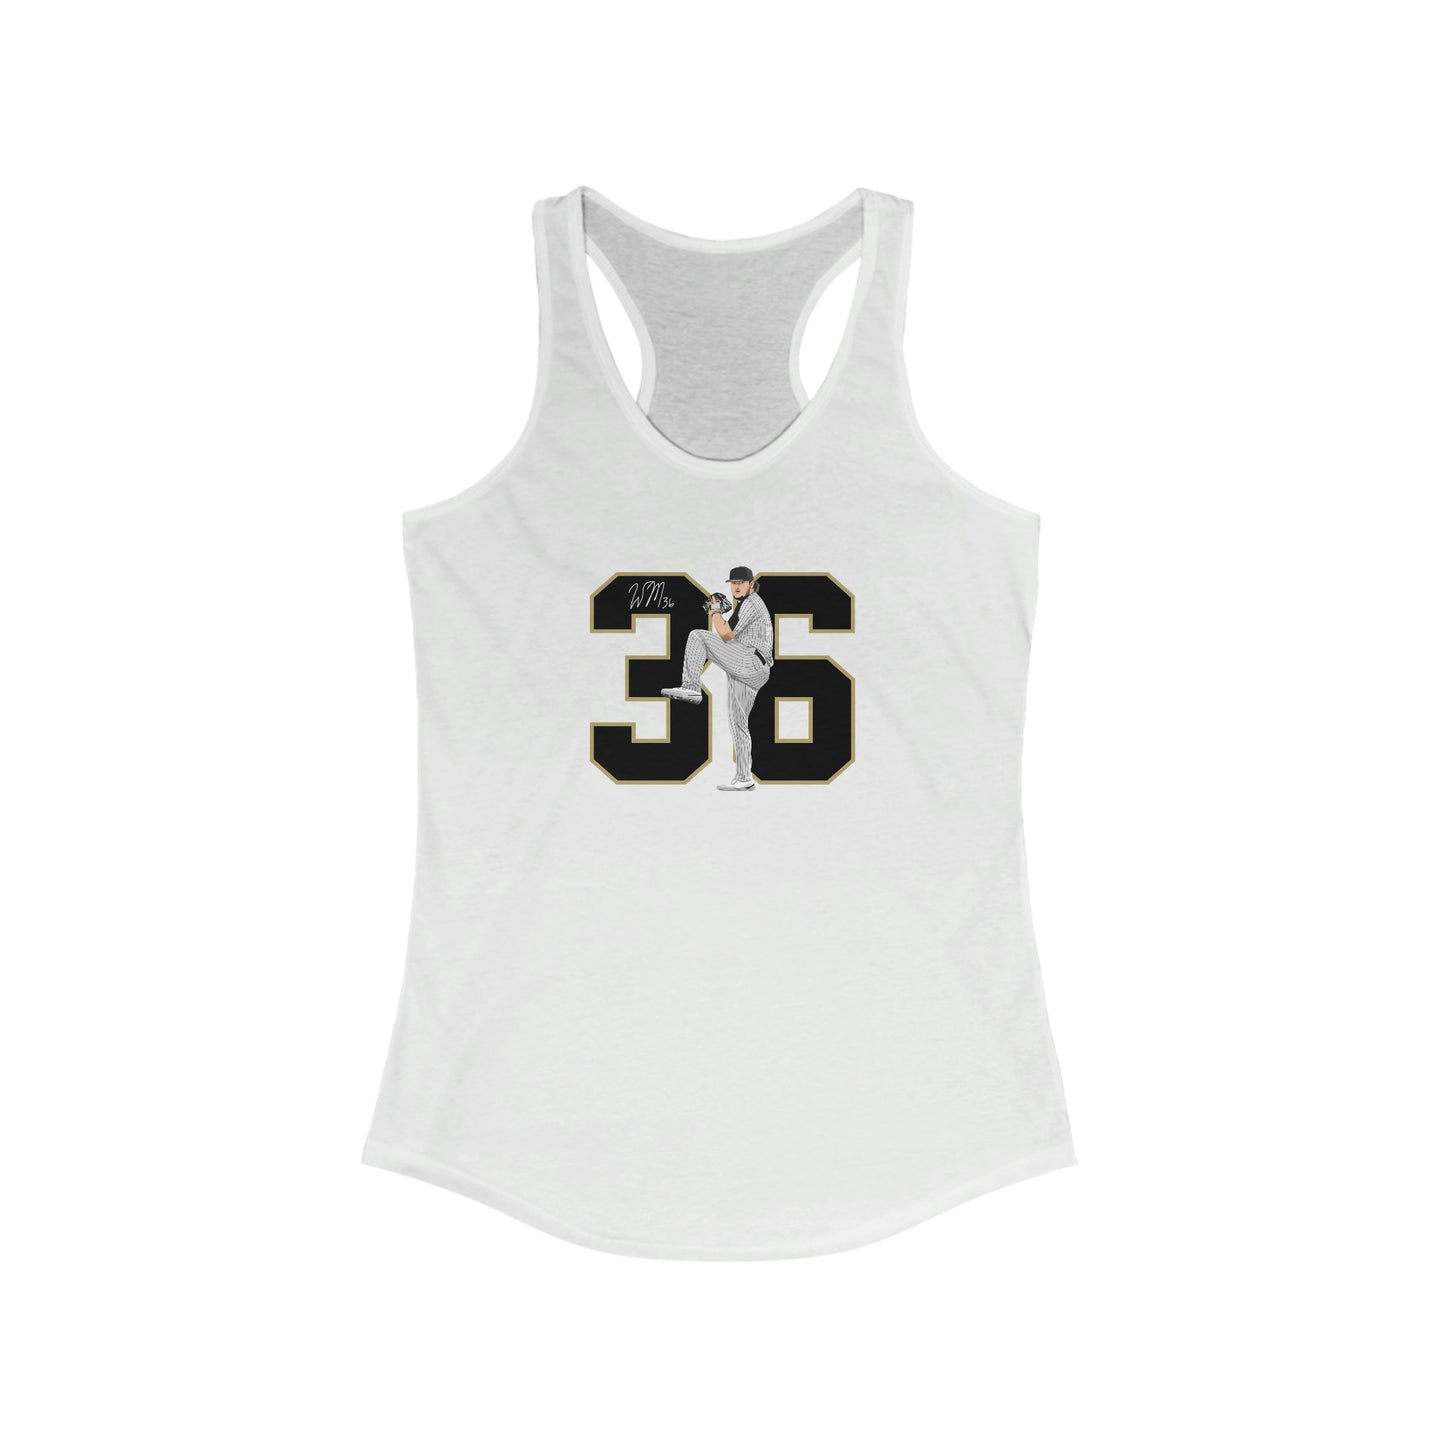 Will Melby Graphic Women's Racerback Tank